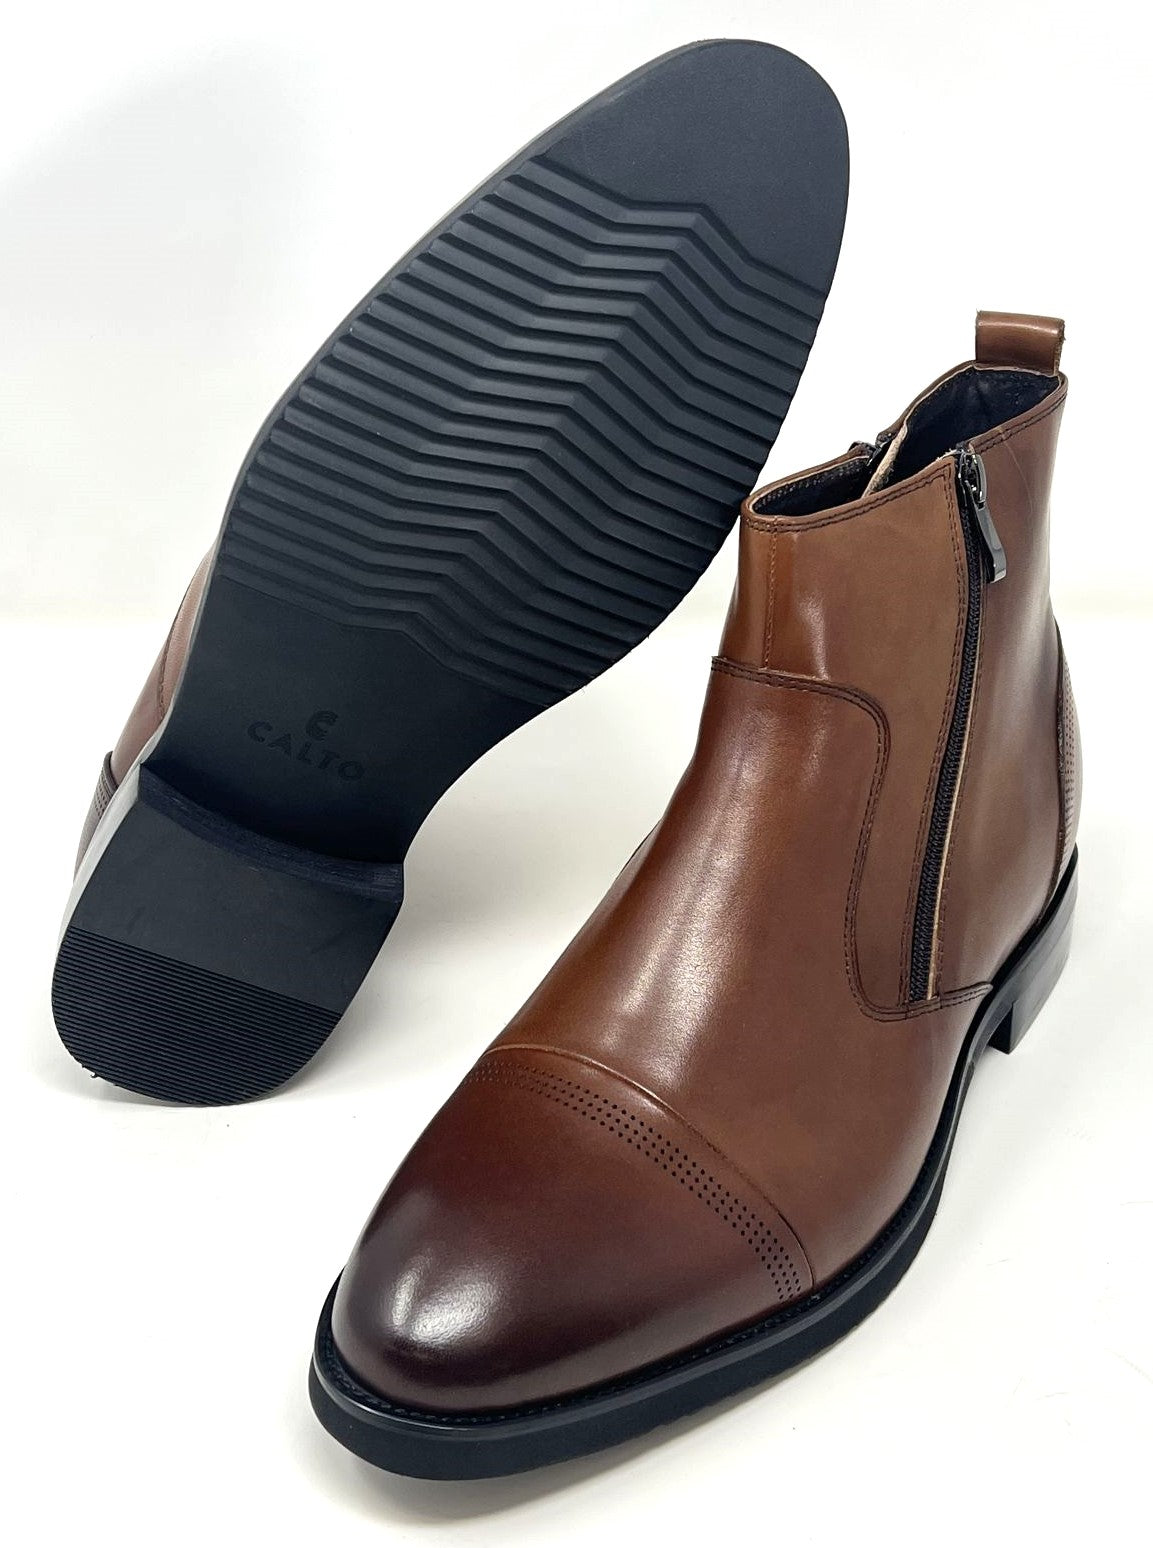 FSO0090 - 2.8 Inches Taller (Brown) - Size 10 Only